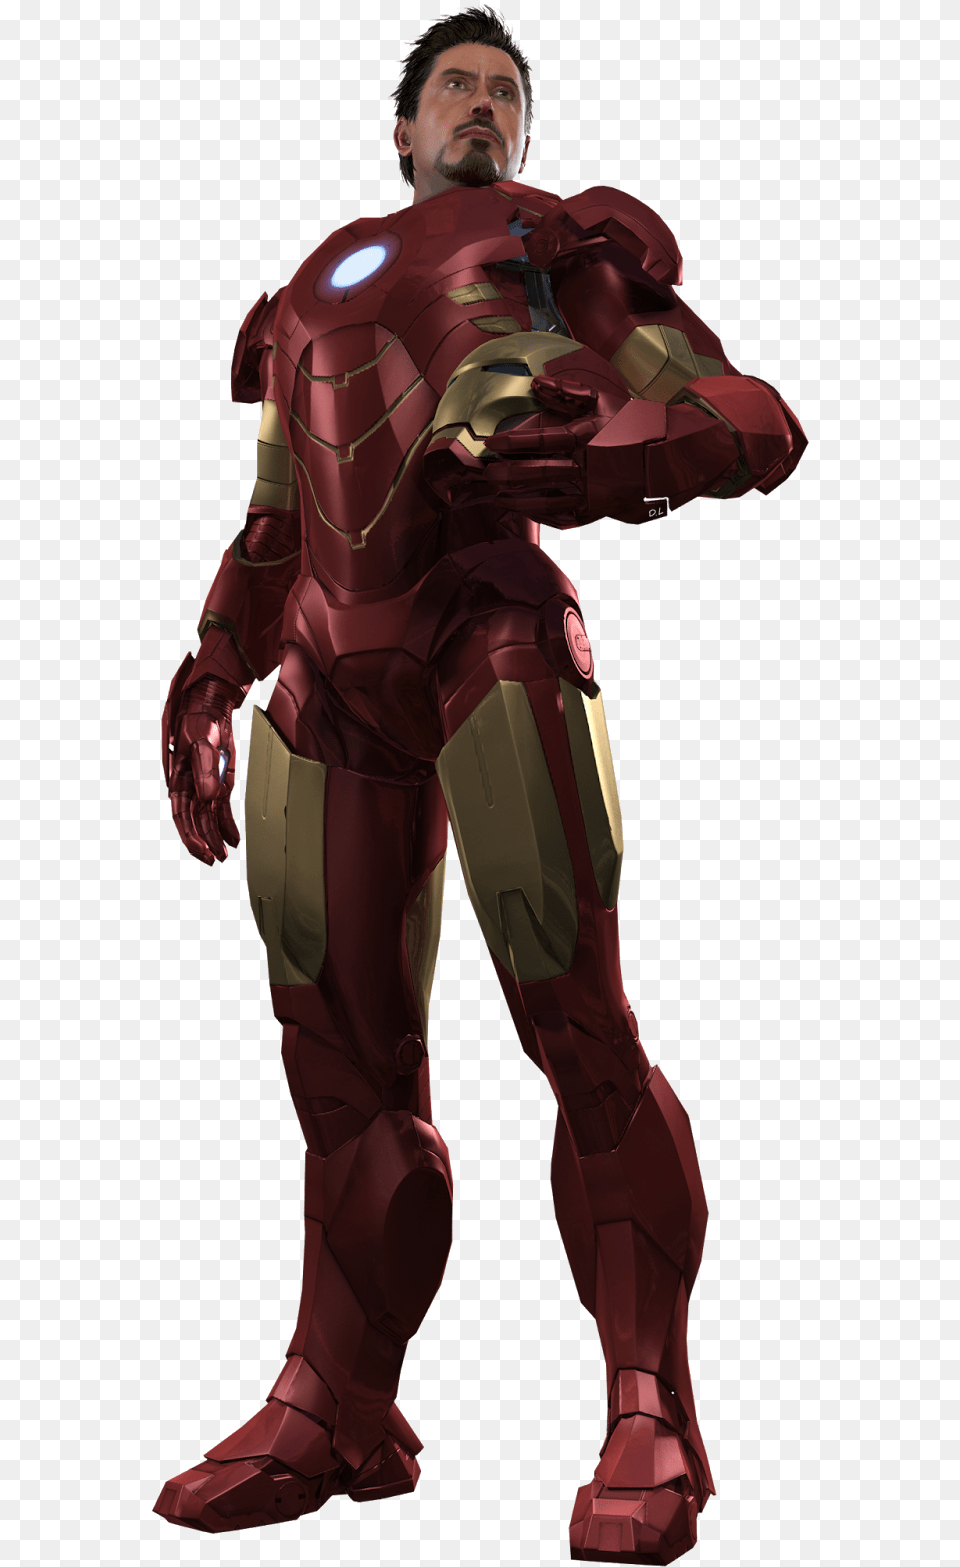 Ironman Avengers Tony Stark Iron Man, Armor, Adult, Male, Person Png Image